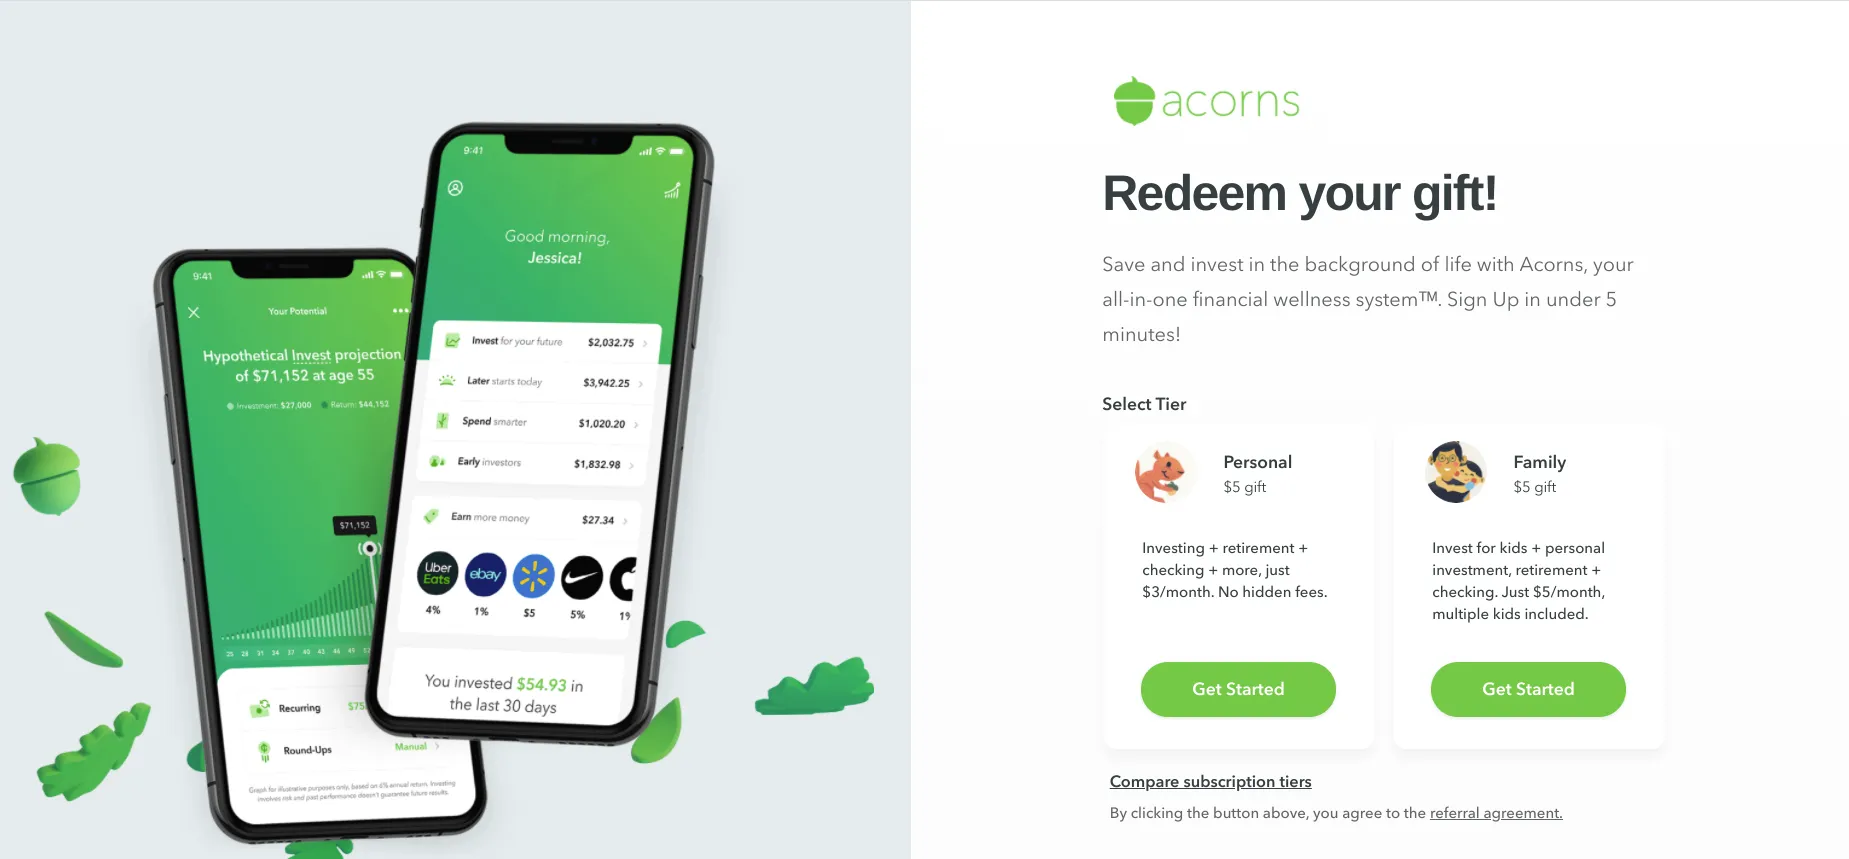 This image depicts two phones floating on the left side, both displaying the Acorns app interface. On the right side, there is a text explaining how the referral program works in two different tiers: the 1st tier is personal, and the 2nd tier is family. Essentially, the image is showing how the tiered referral program works for a financial app.